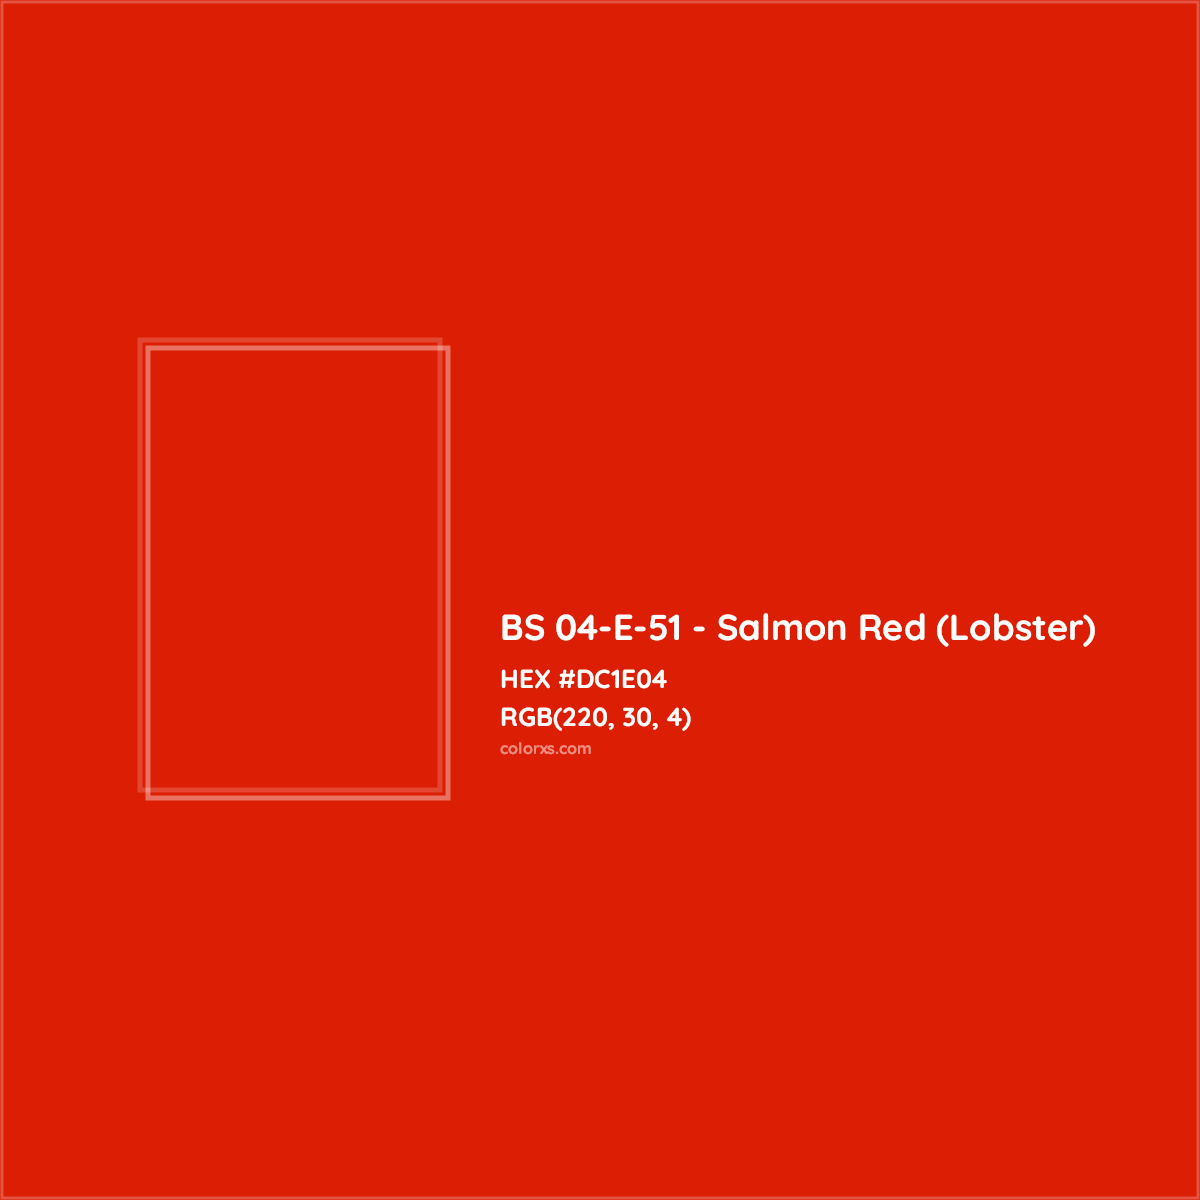 HEX #DC1E04 BS 04-E-51 - Salmon Red (Lobster) CMS British Standard 4800 - Color Code